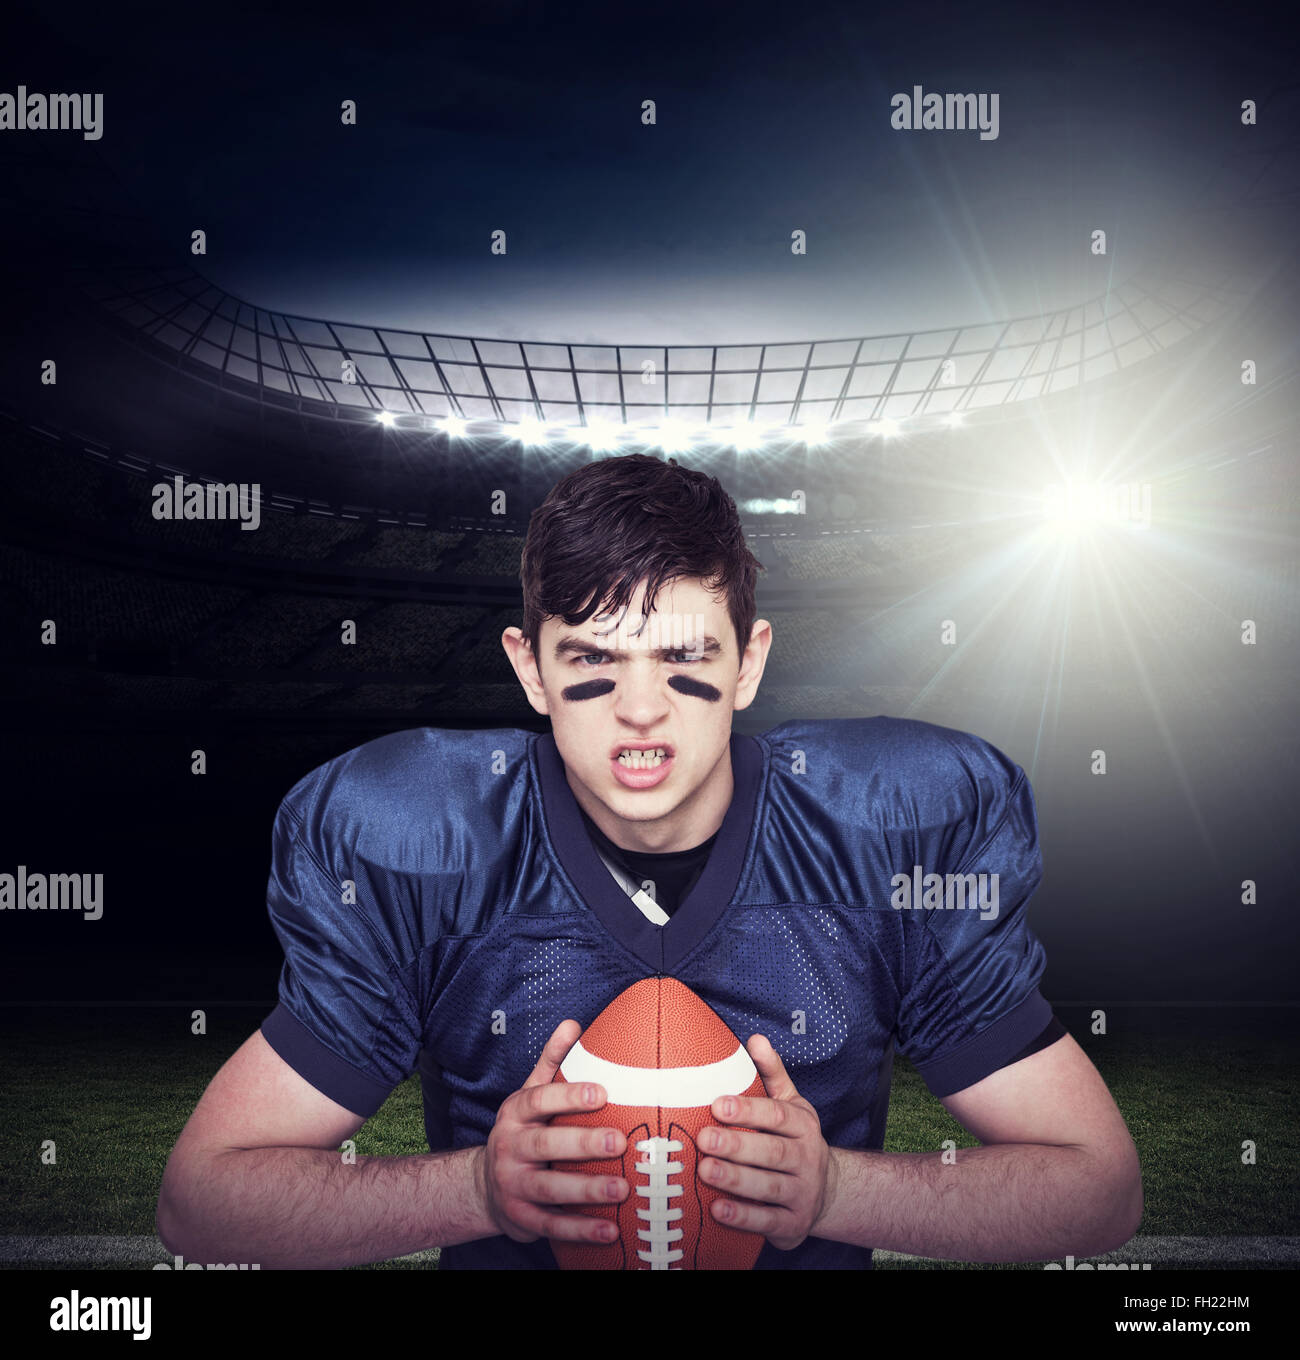 Composite image of enraged american football player holding a ball Stock Photo